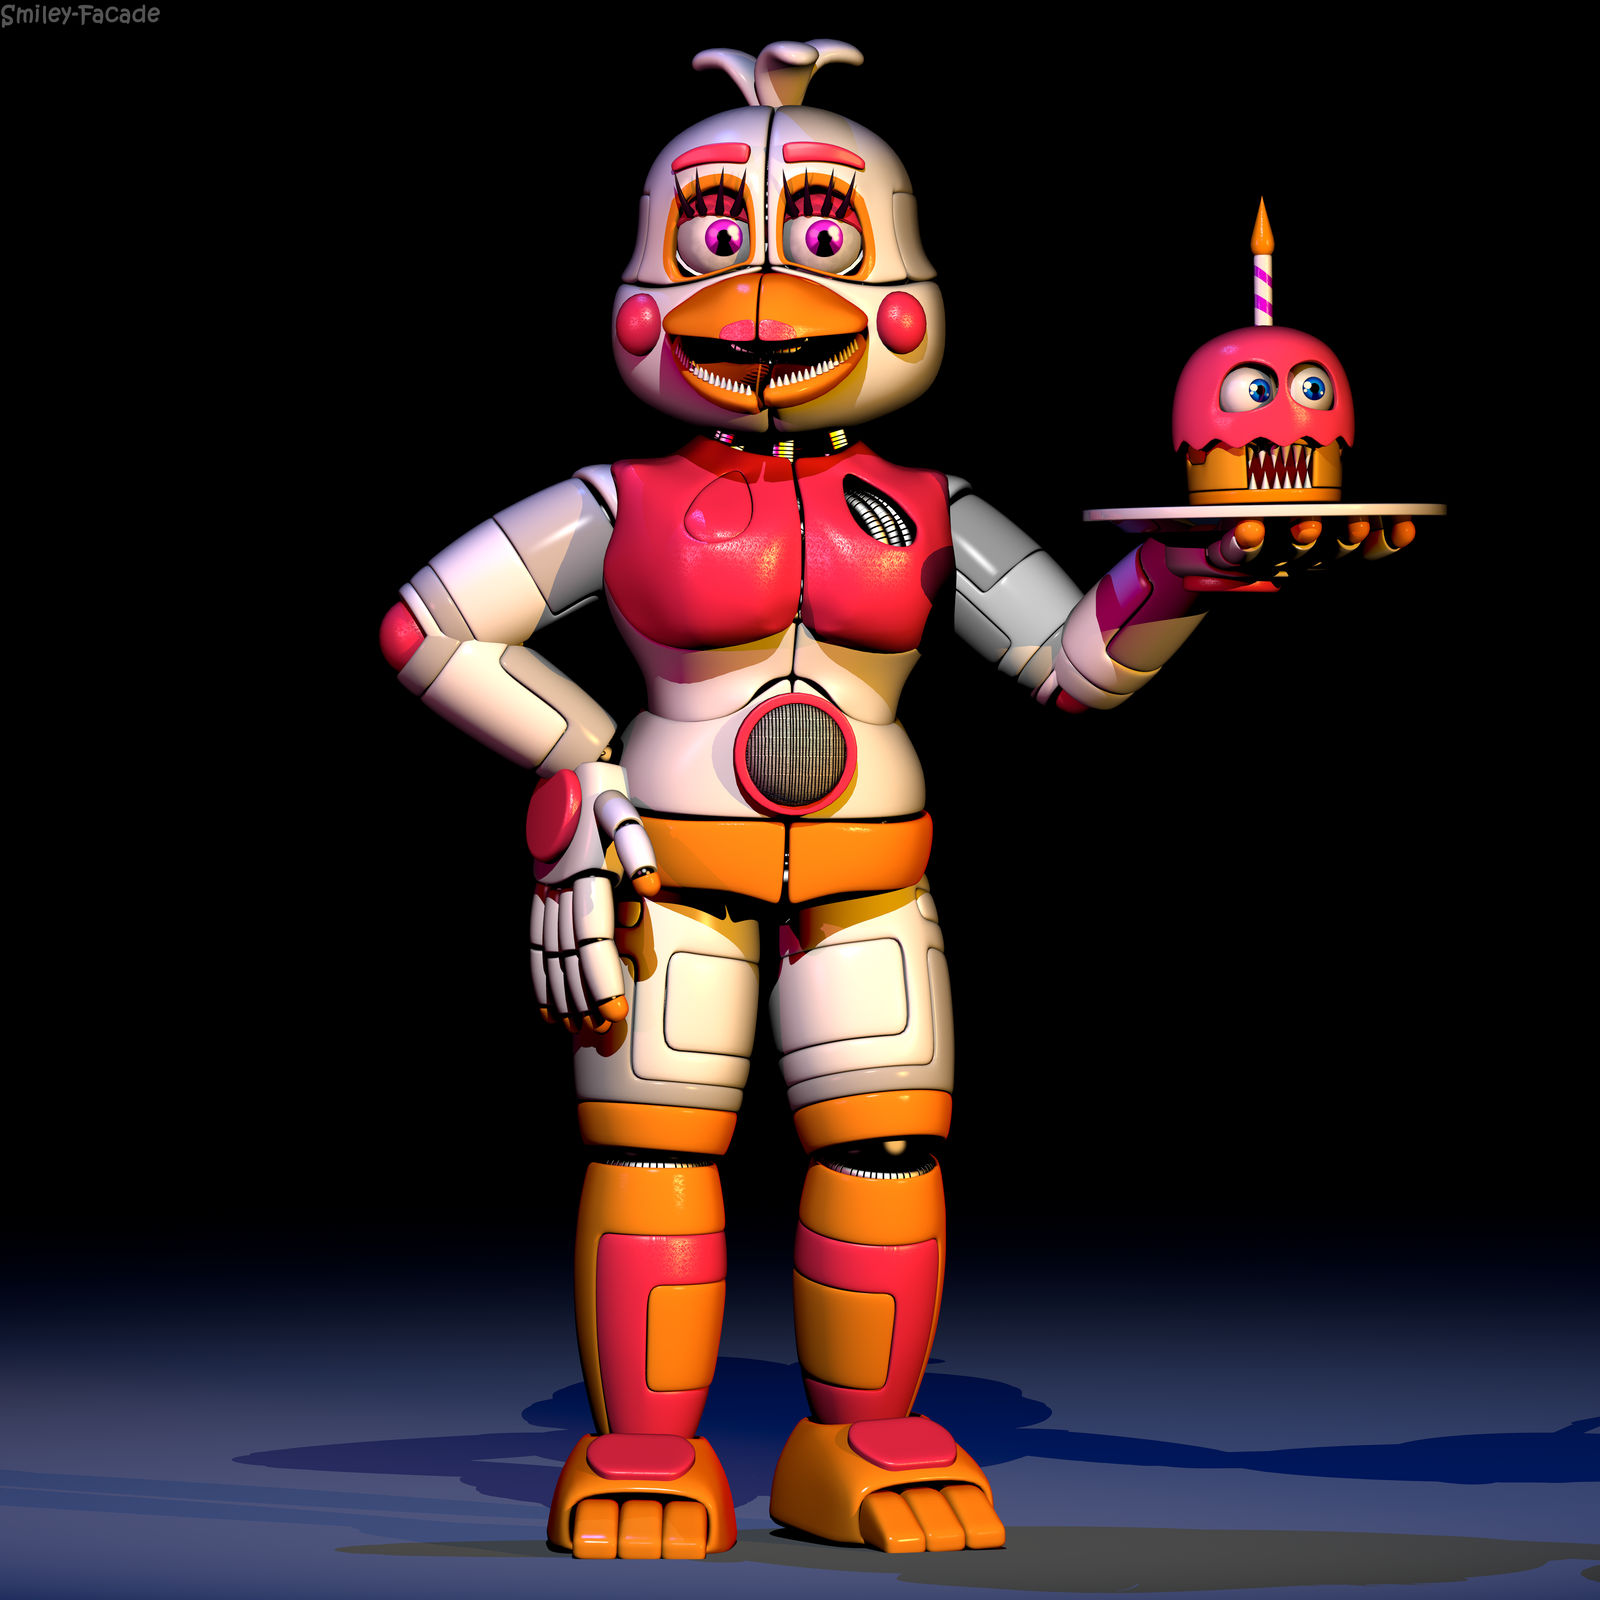 Funtime Chica v4.5 - Extras Showcase by The-Smileyy on DeviantArt